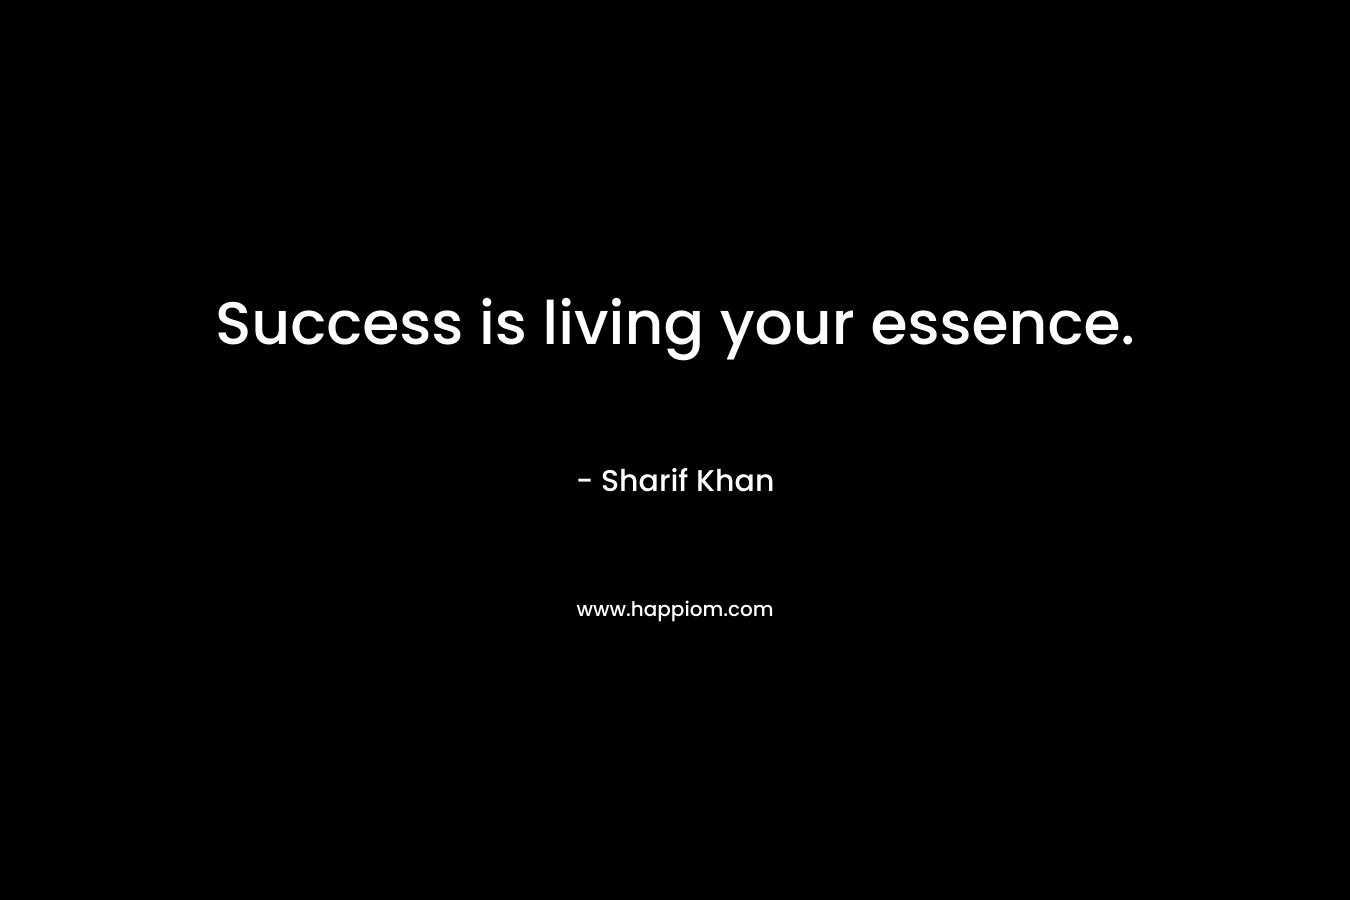 Success is living your essence.